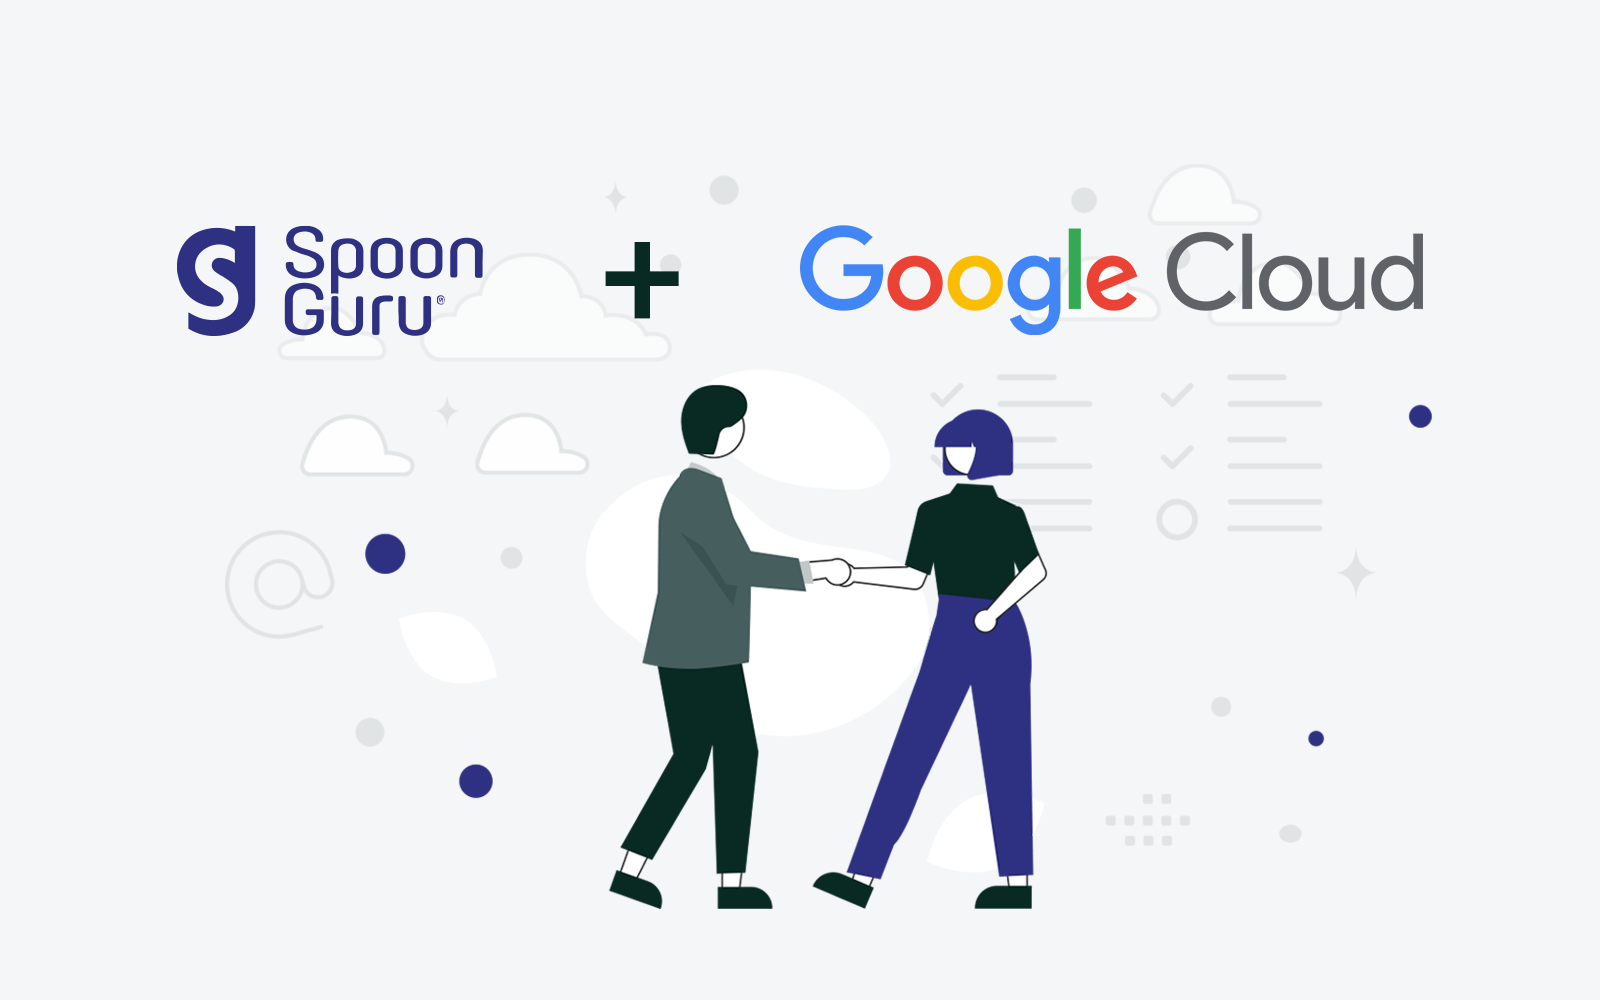 Spoon Guru will bring nutrition science technology to Google Cloud Marketplace